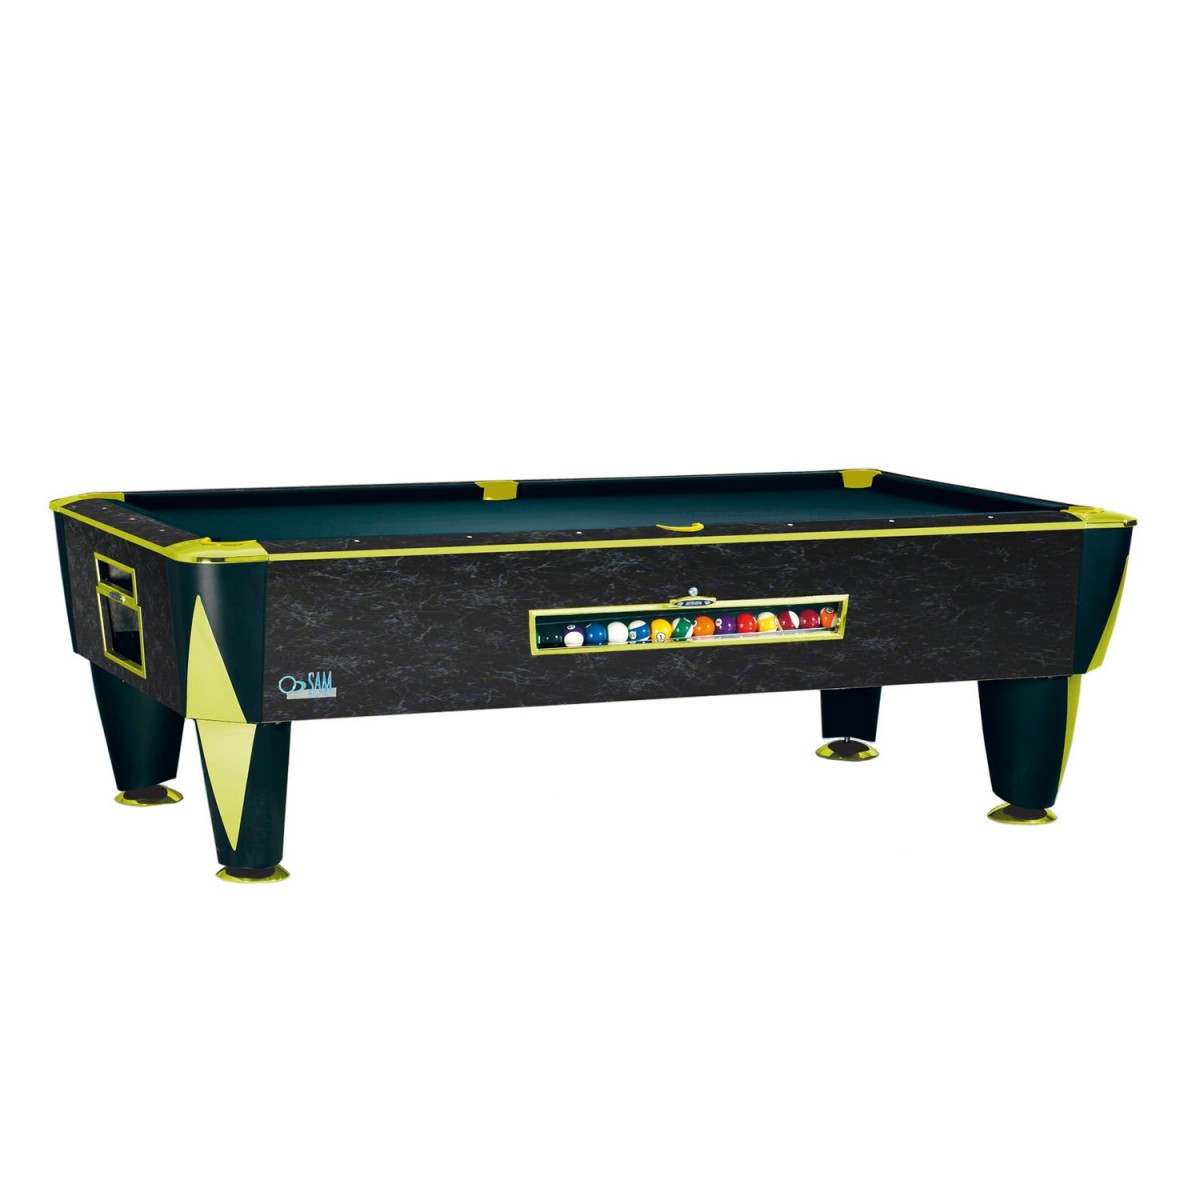 Magno Cosmic American Slate Bed Pool Table